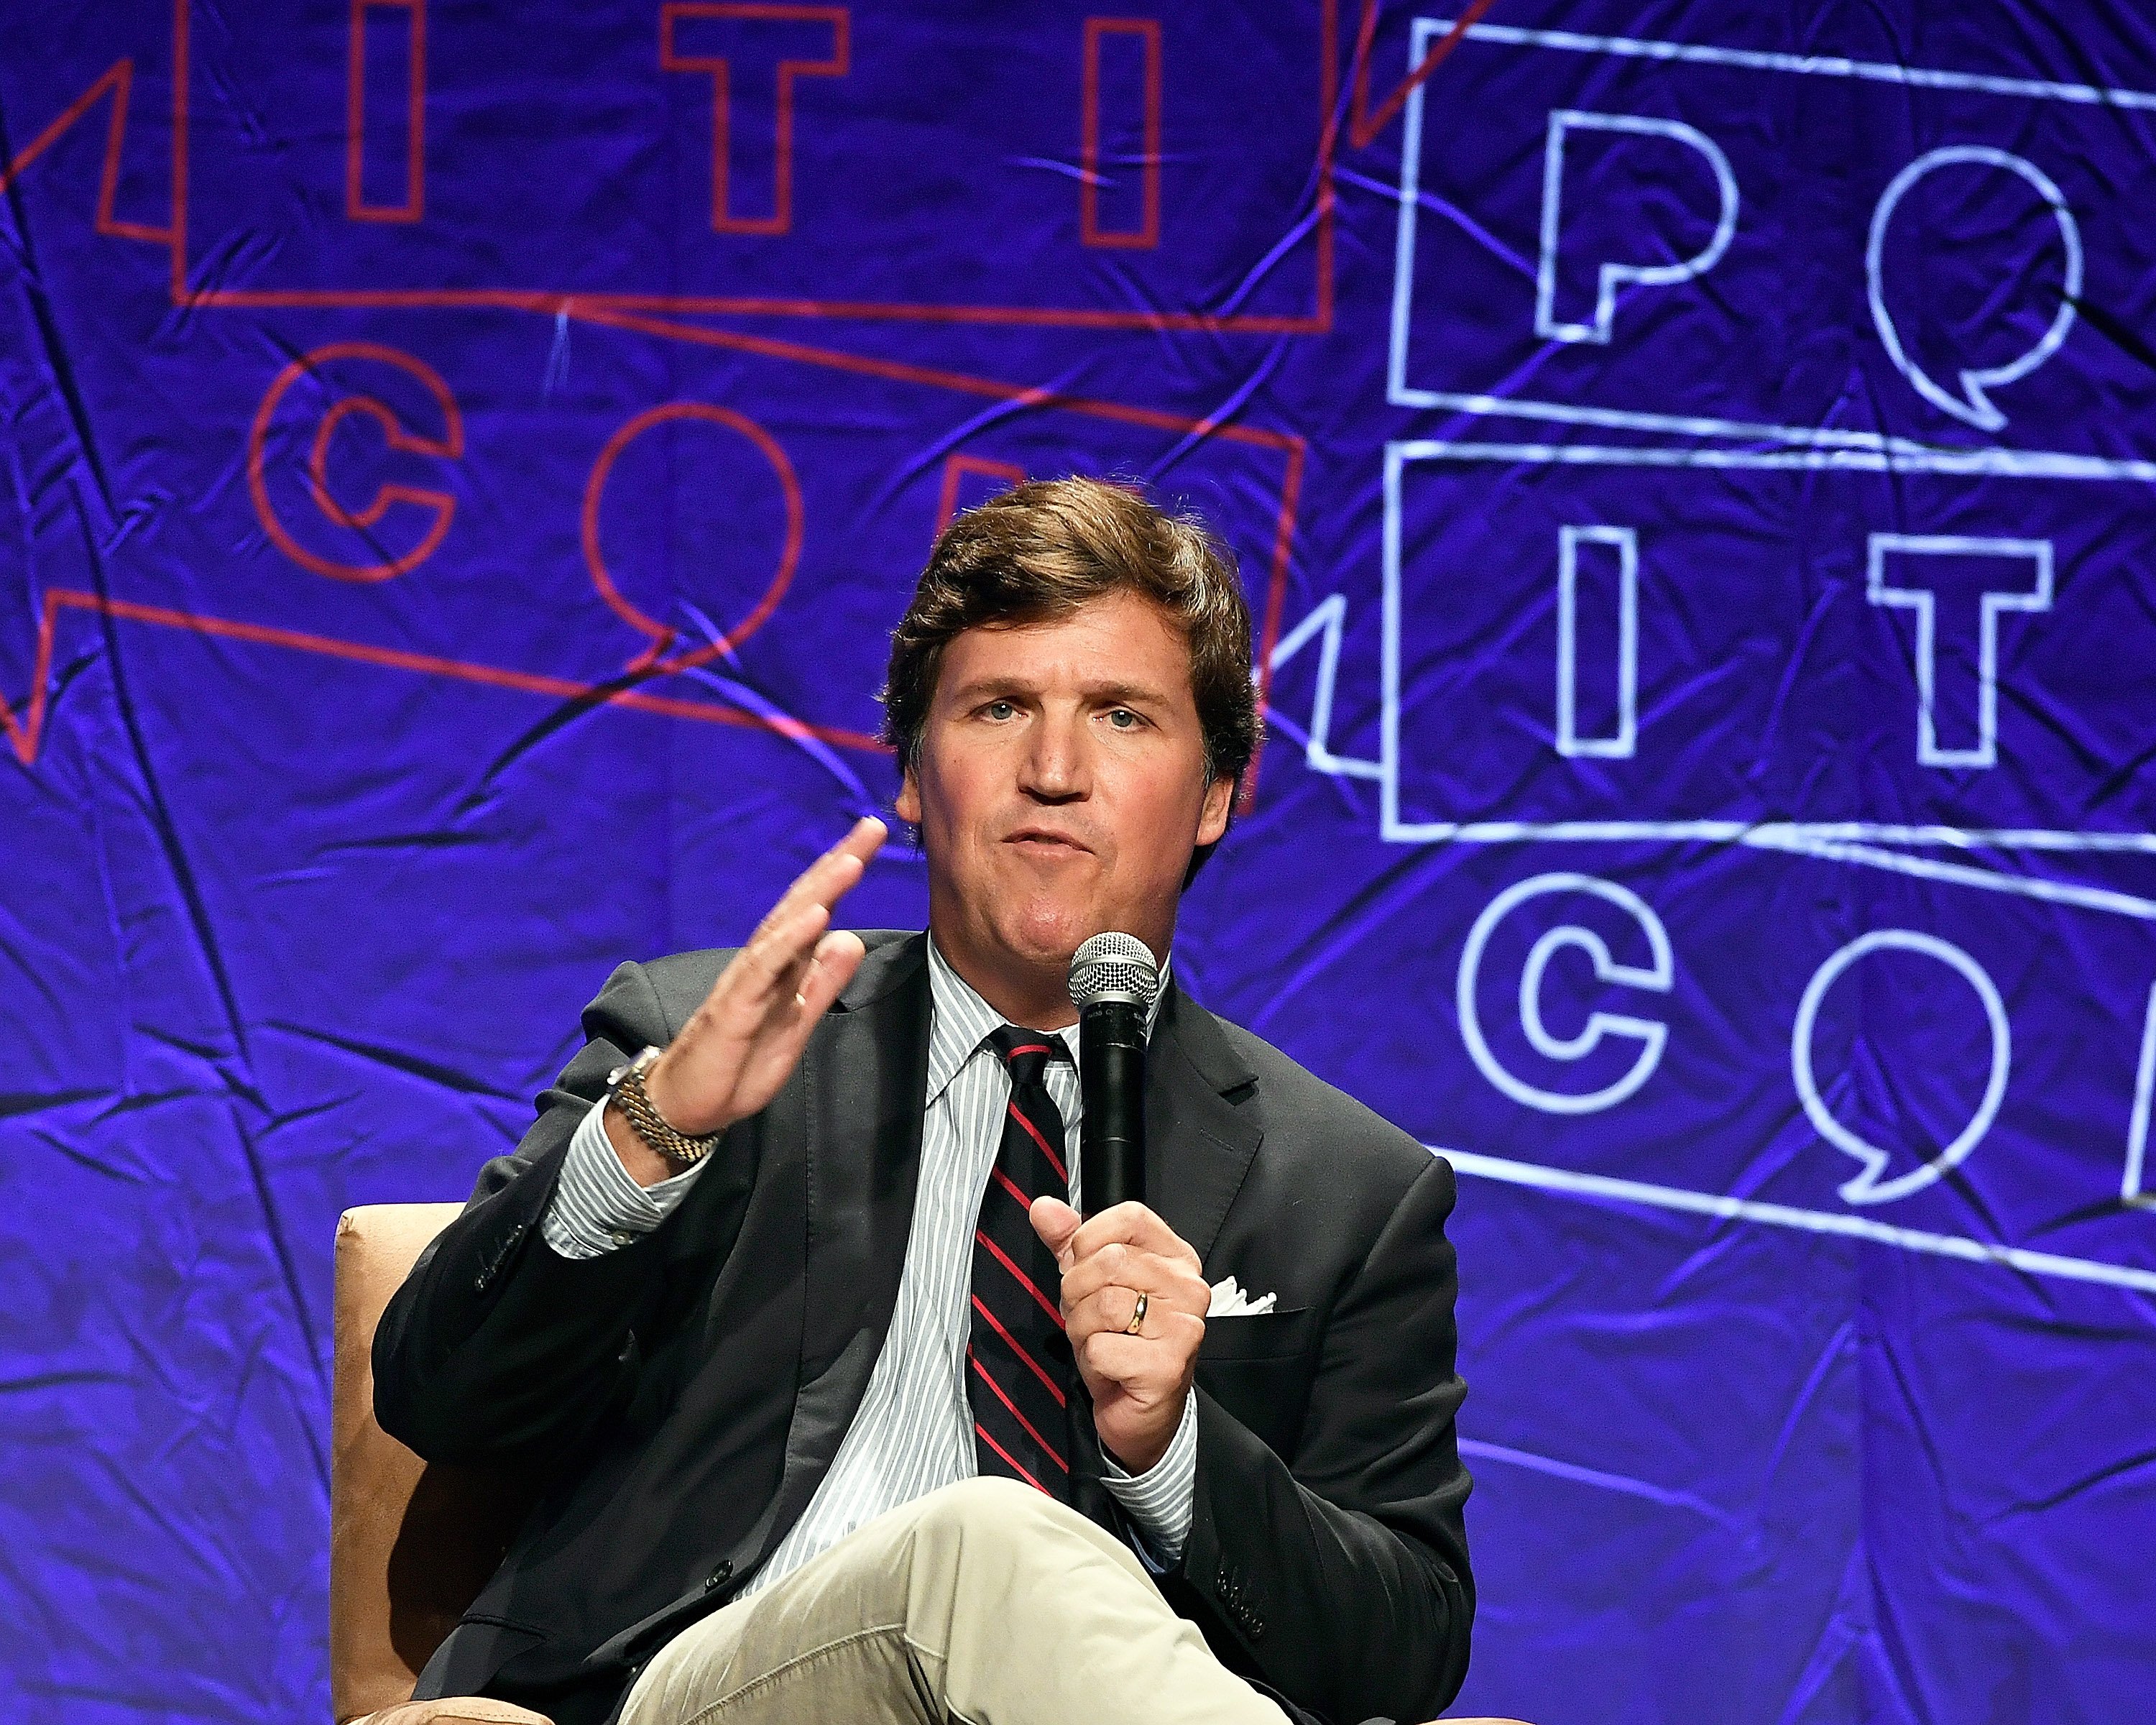 Tucker Carlson speaks during Politicon 2018 at Los Angeles Convention Center on October 21, 2018, in Los Angeles, California | Source: Getty Images